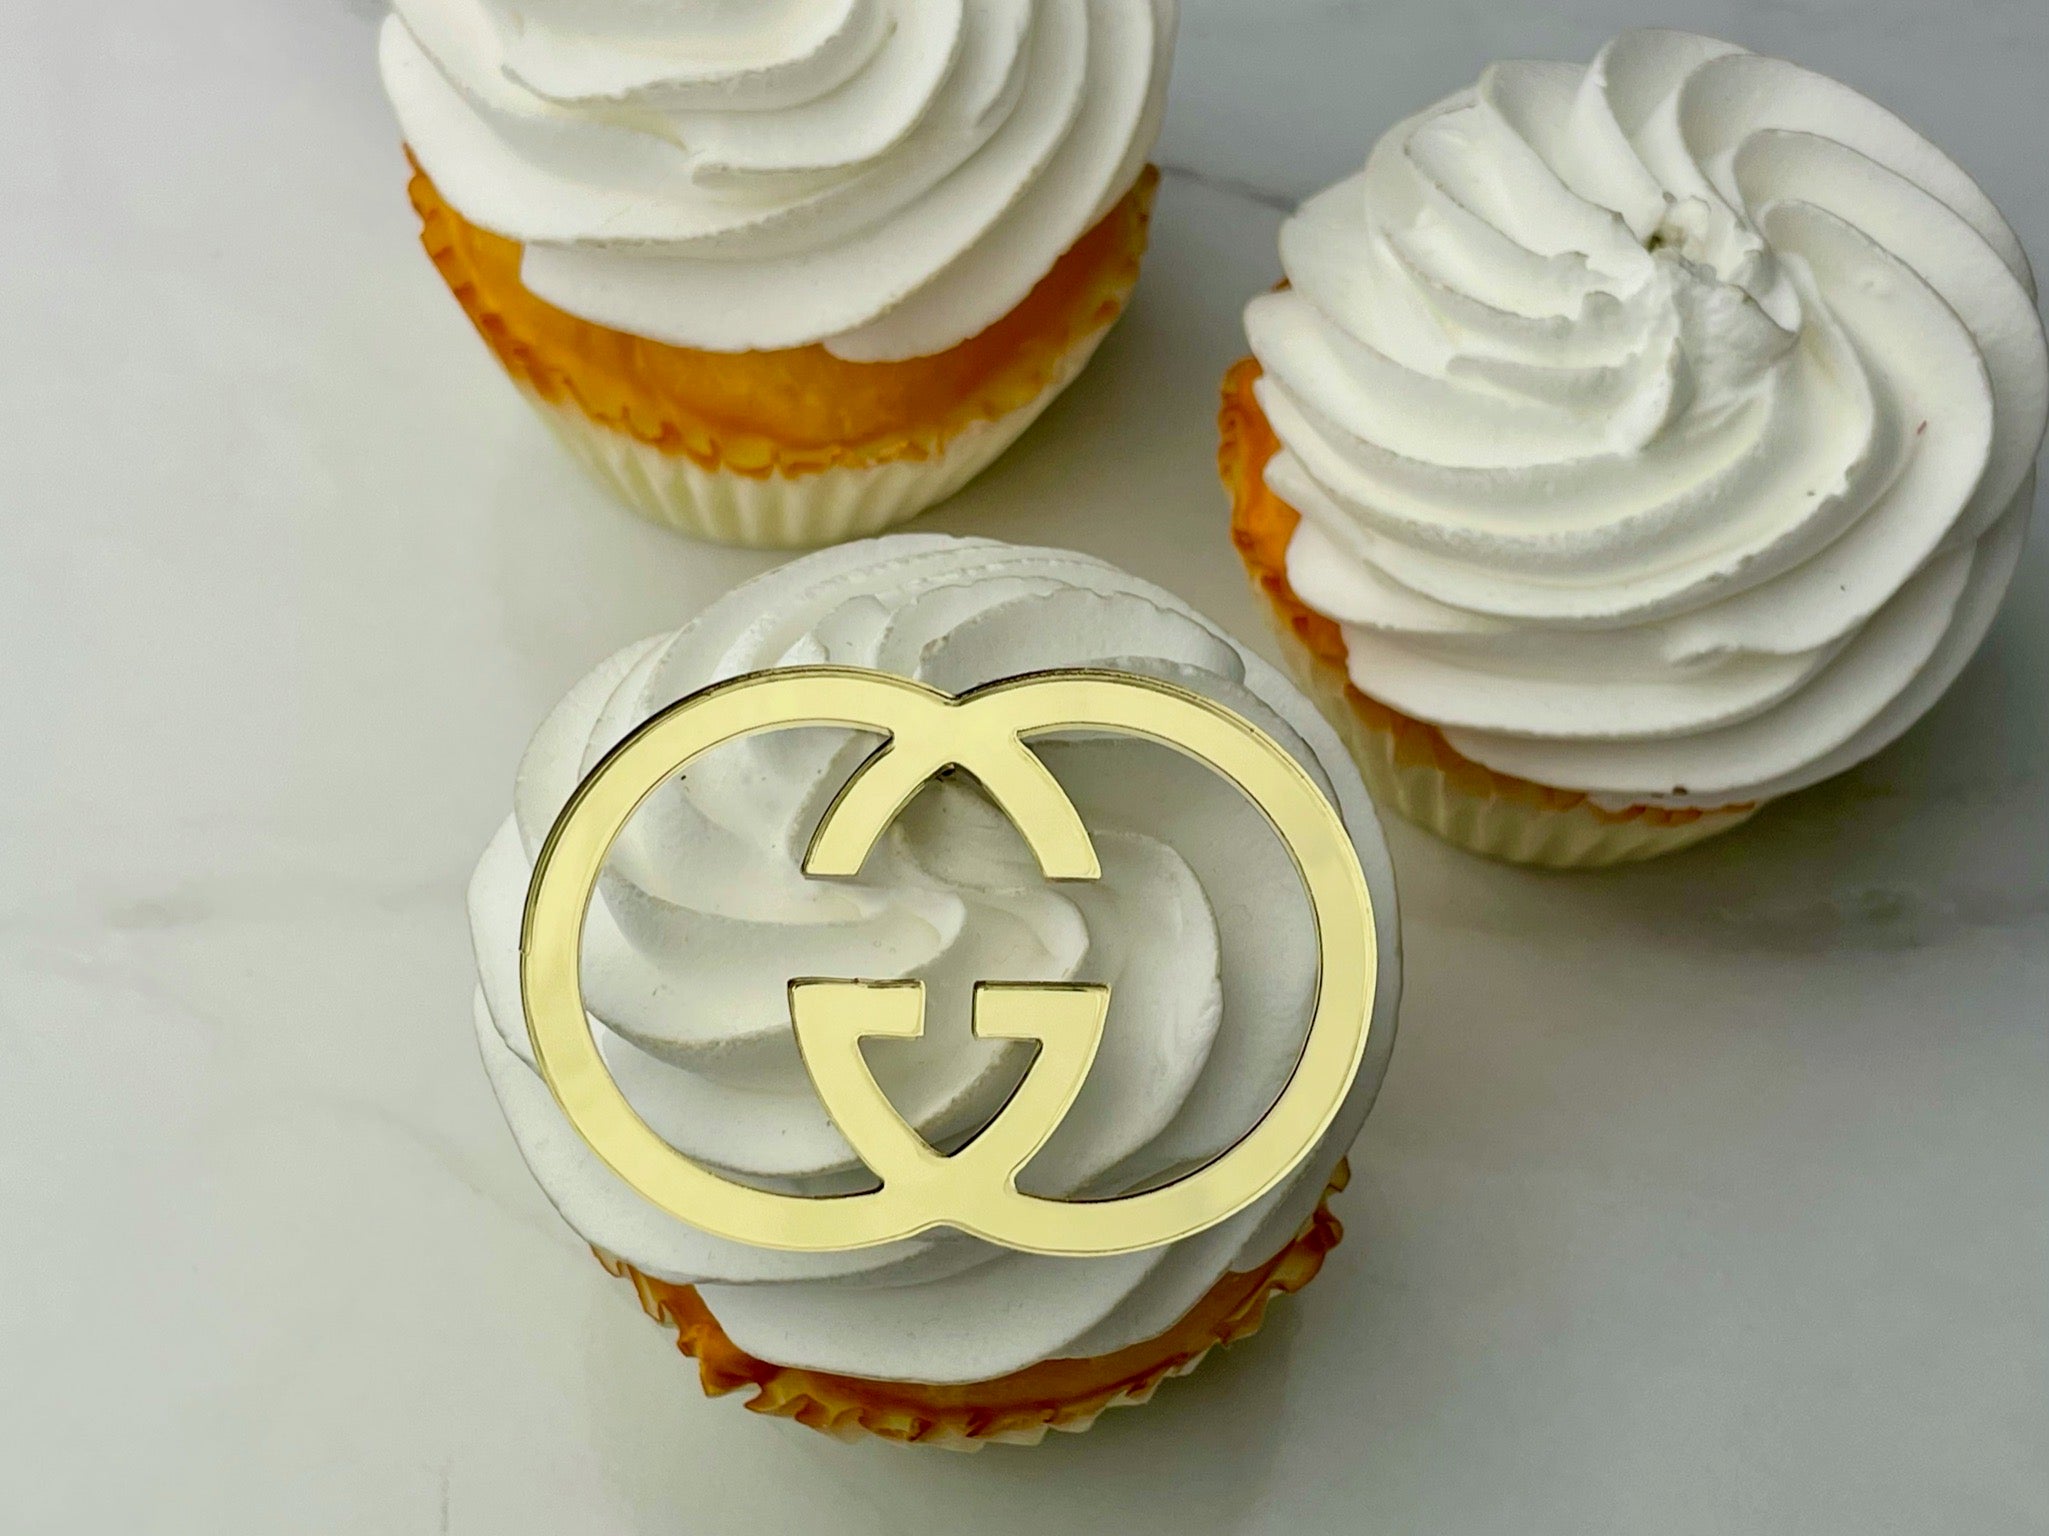 Fashion & Designer Cake Charms & Toppers